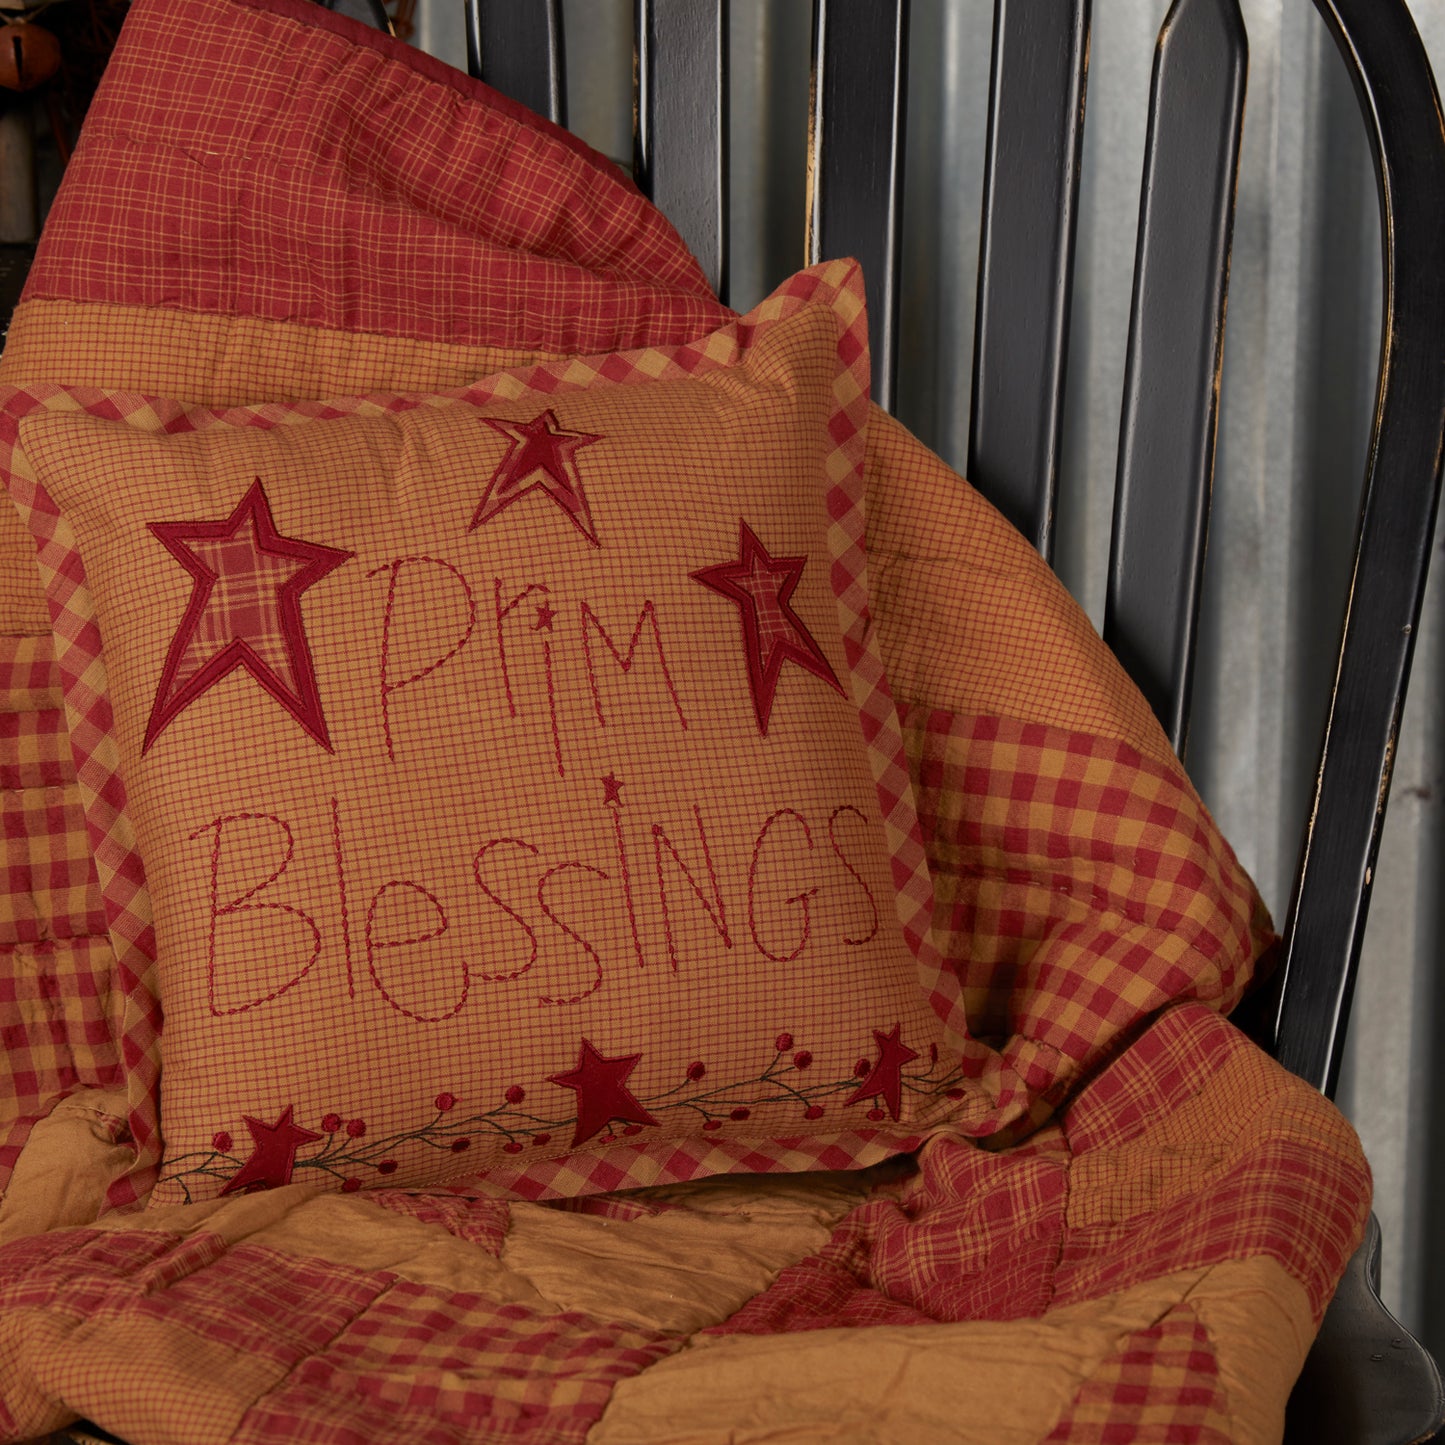 56743-Ninepatch-Star-Prim-Blessings-Pillow-12x12-image-3